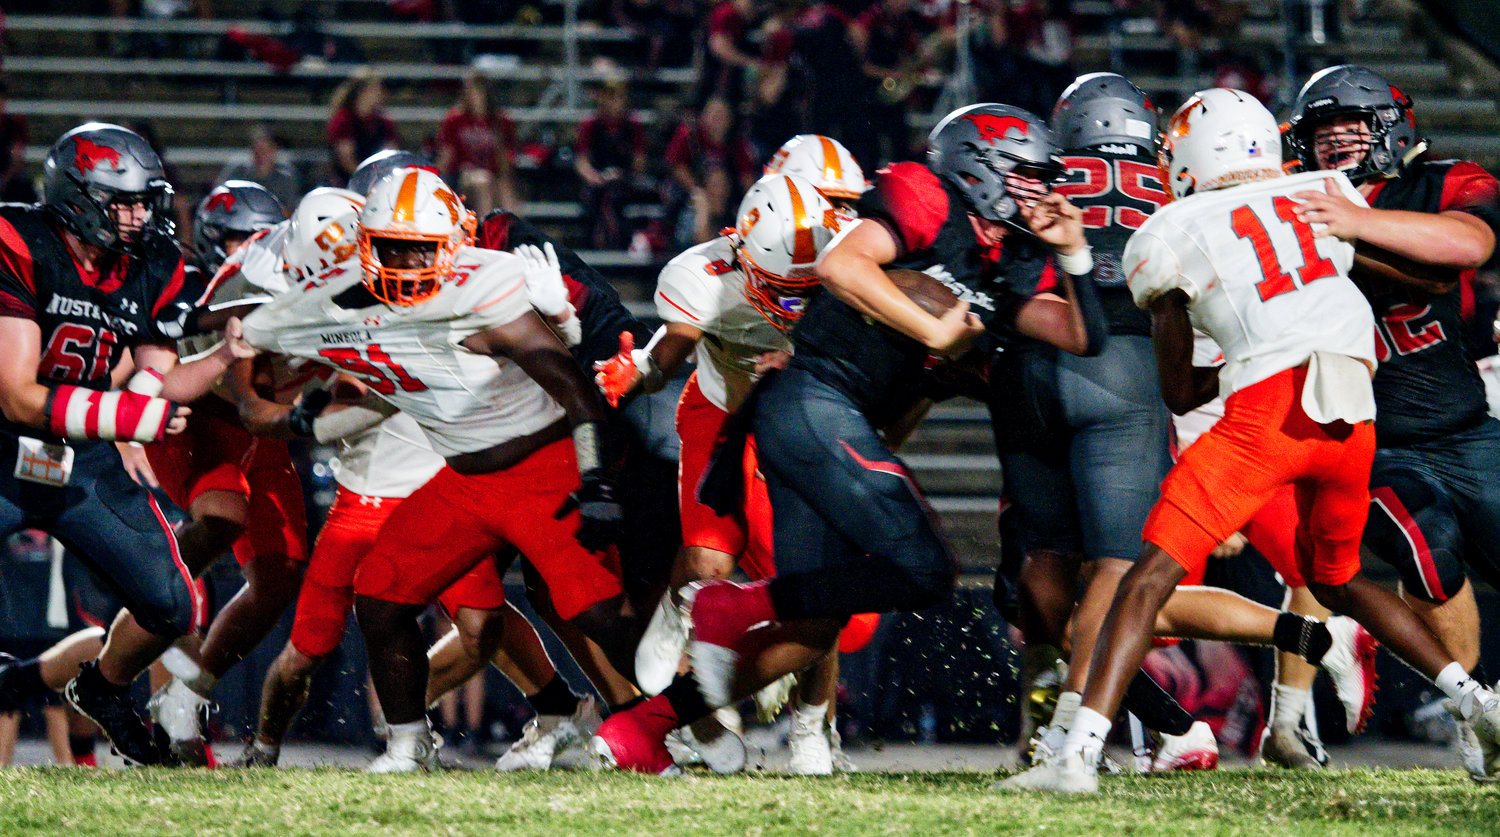 The Yellowjacket defense fights its way through the Hughes Springs line to get to the ball carrier Friday.